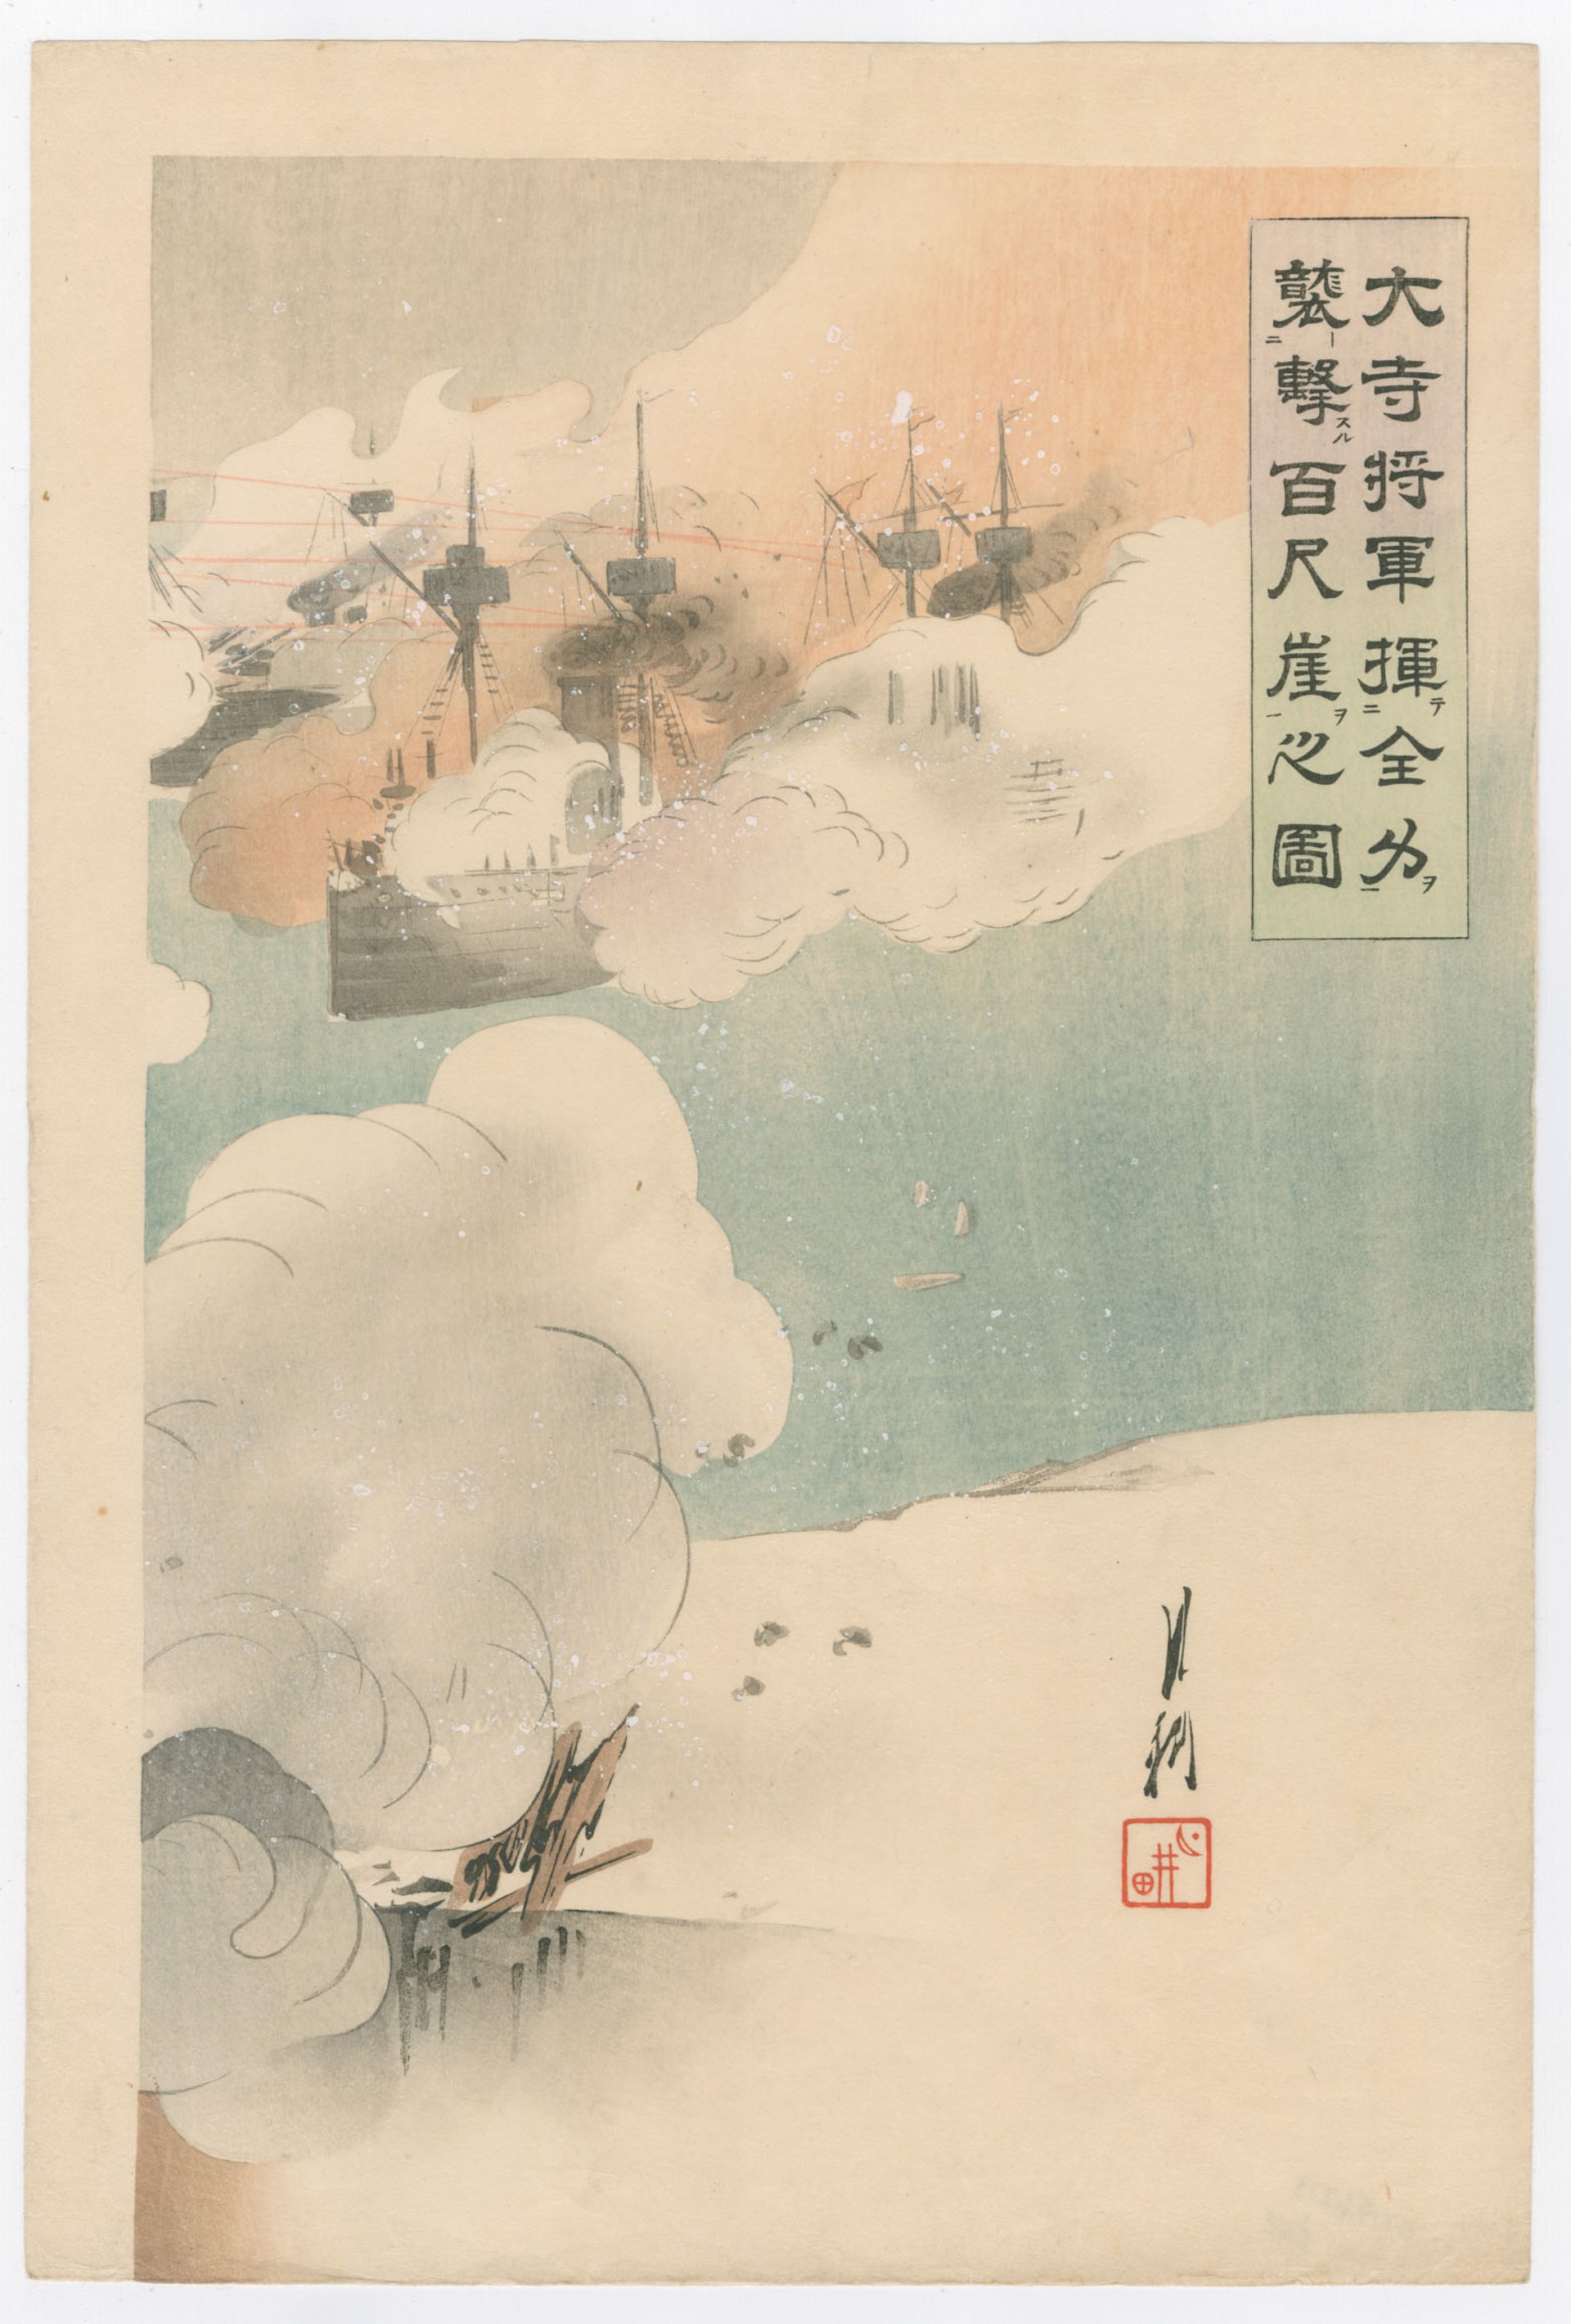 General Odera Attacking the 100 Foot Cliff with all his Might Sino - Japanese war by Ogata Gekko